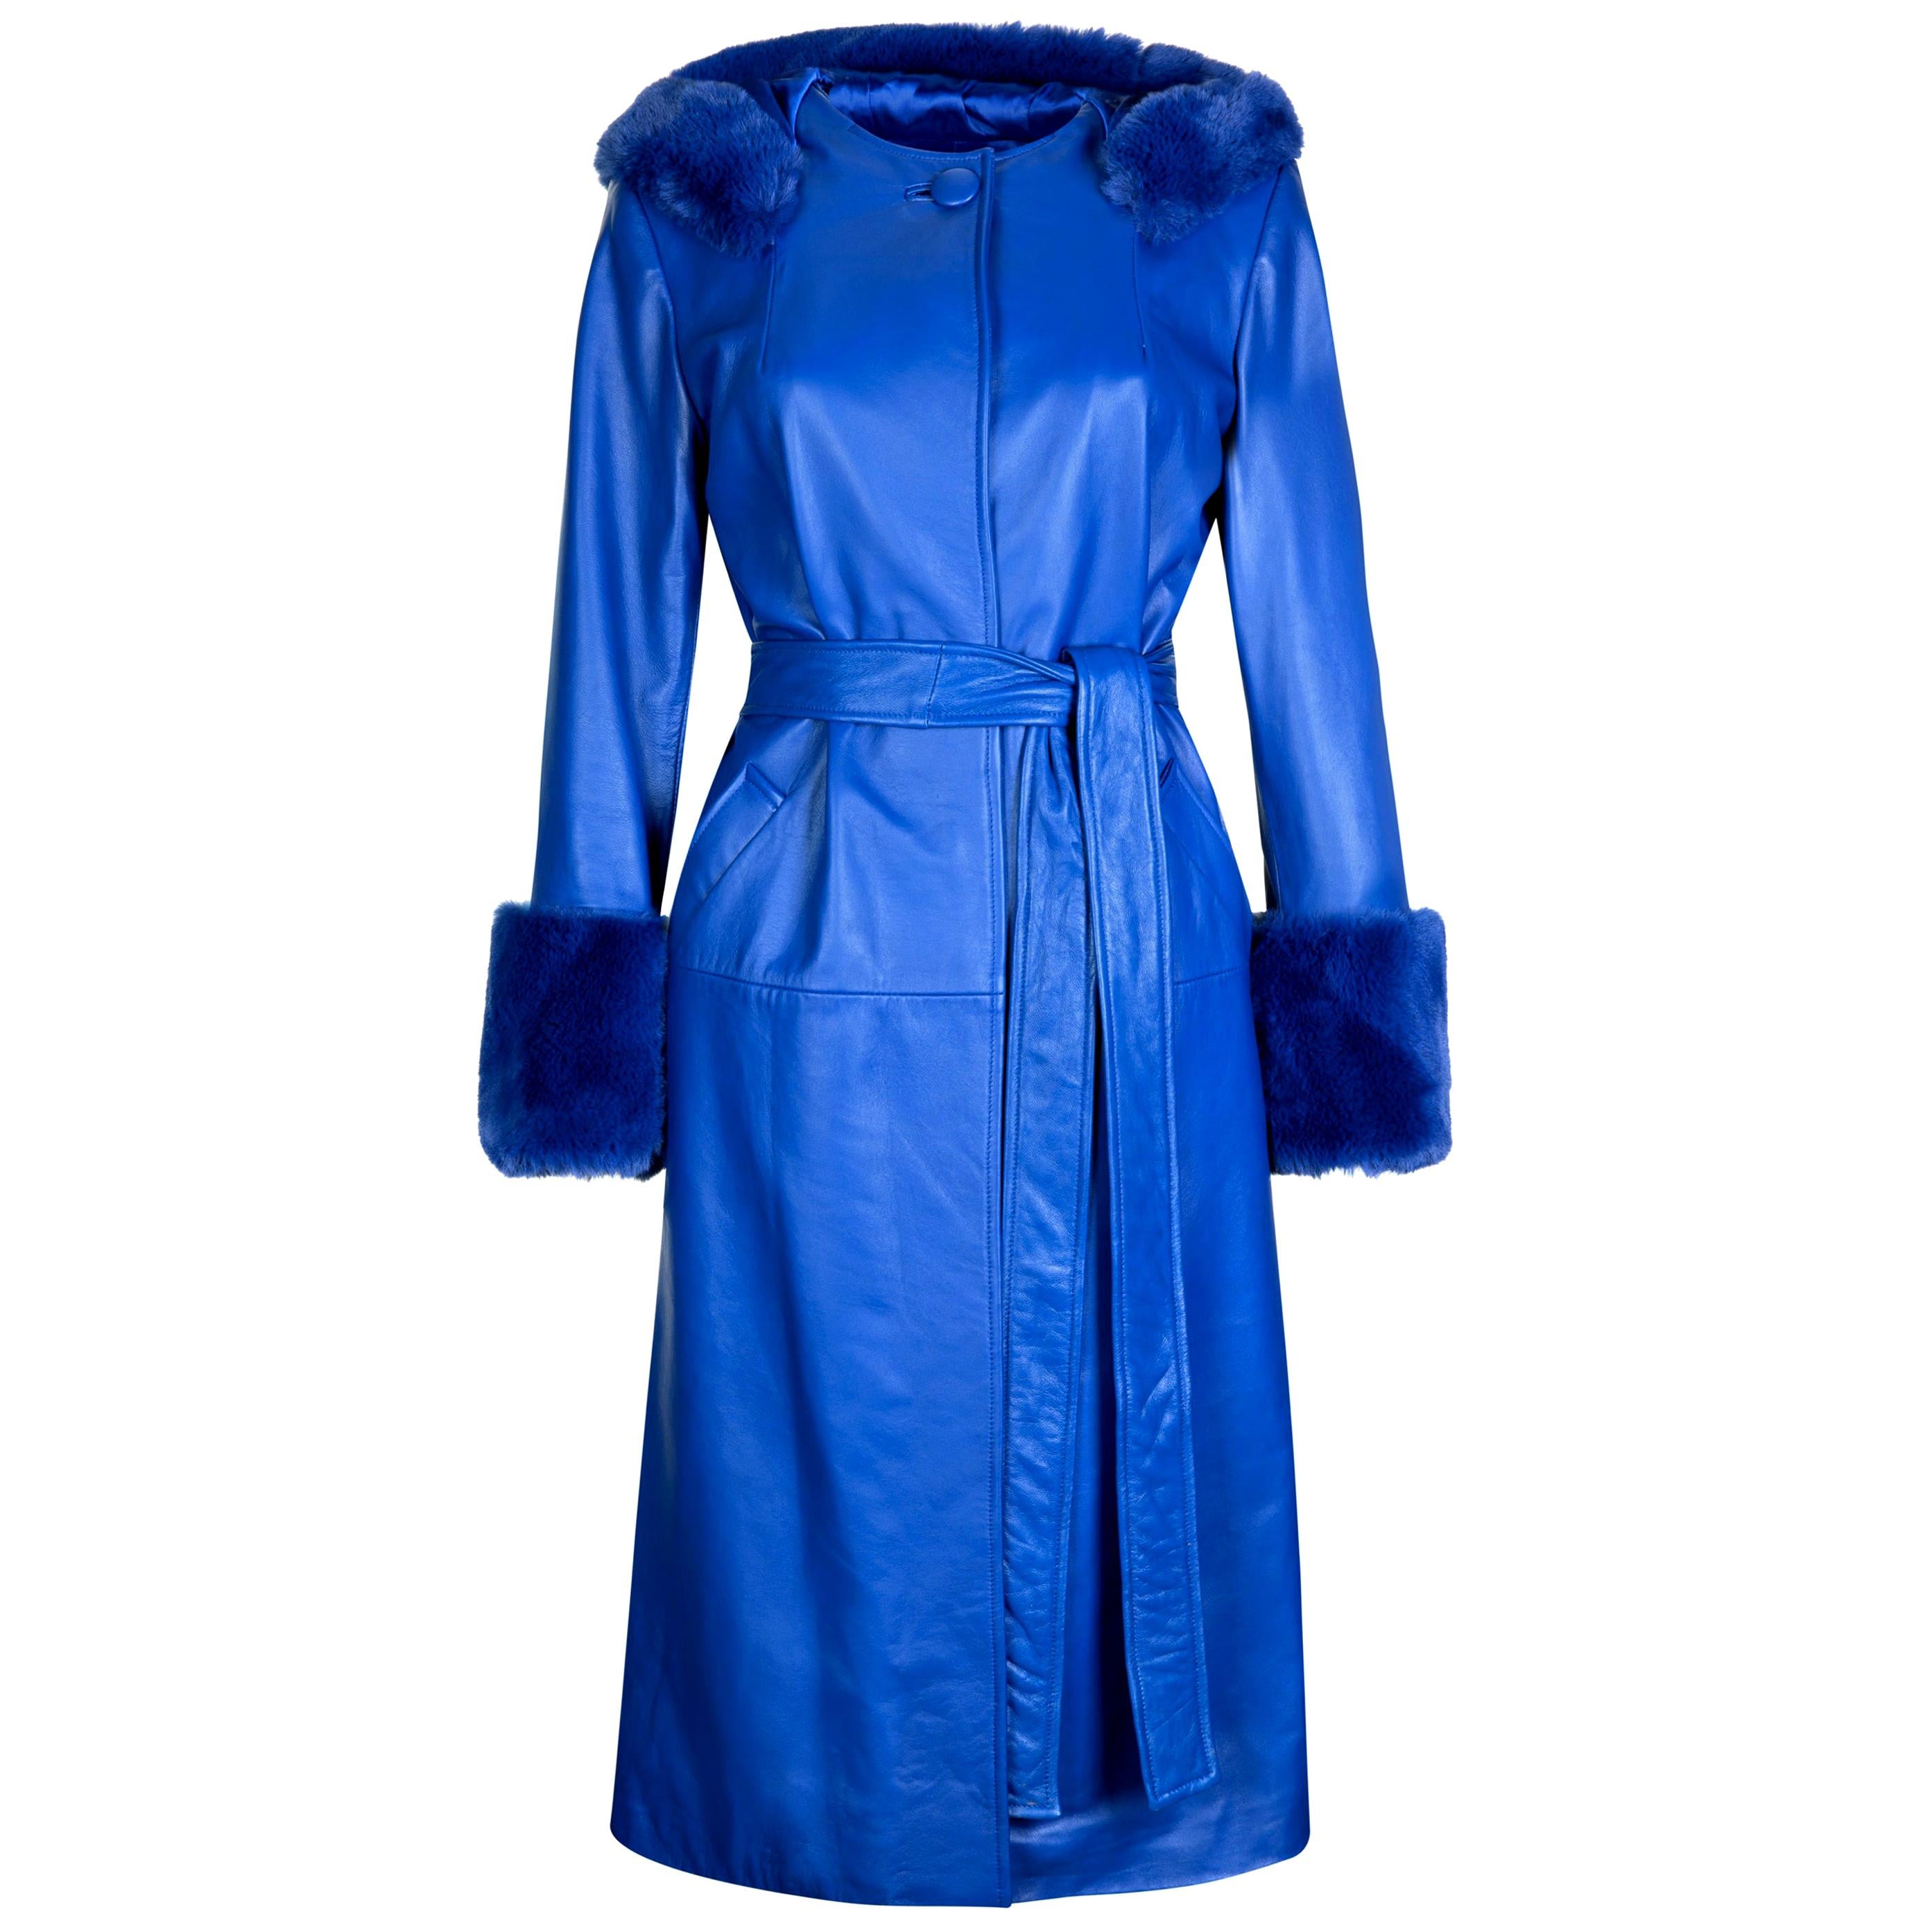 Verheyen London Hooded Leather Trench Coat in Blue with Faux Fur - Size uk 6 For Sale